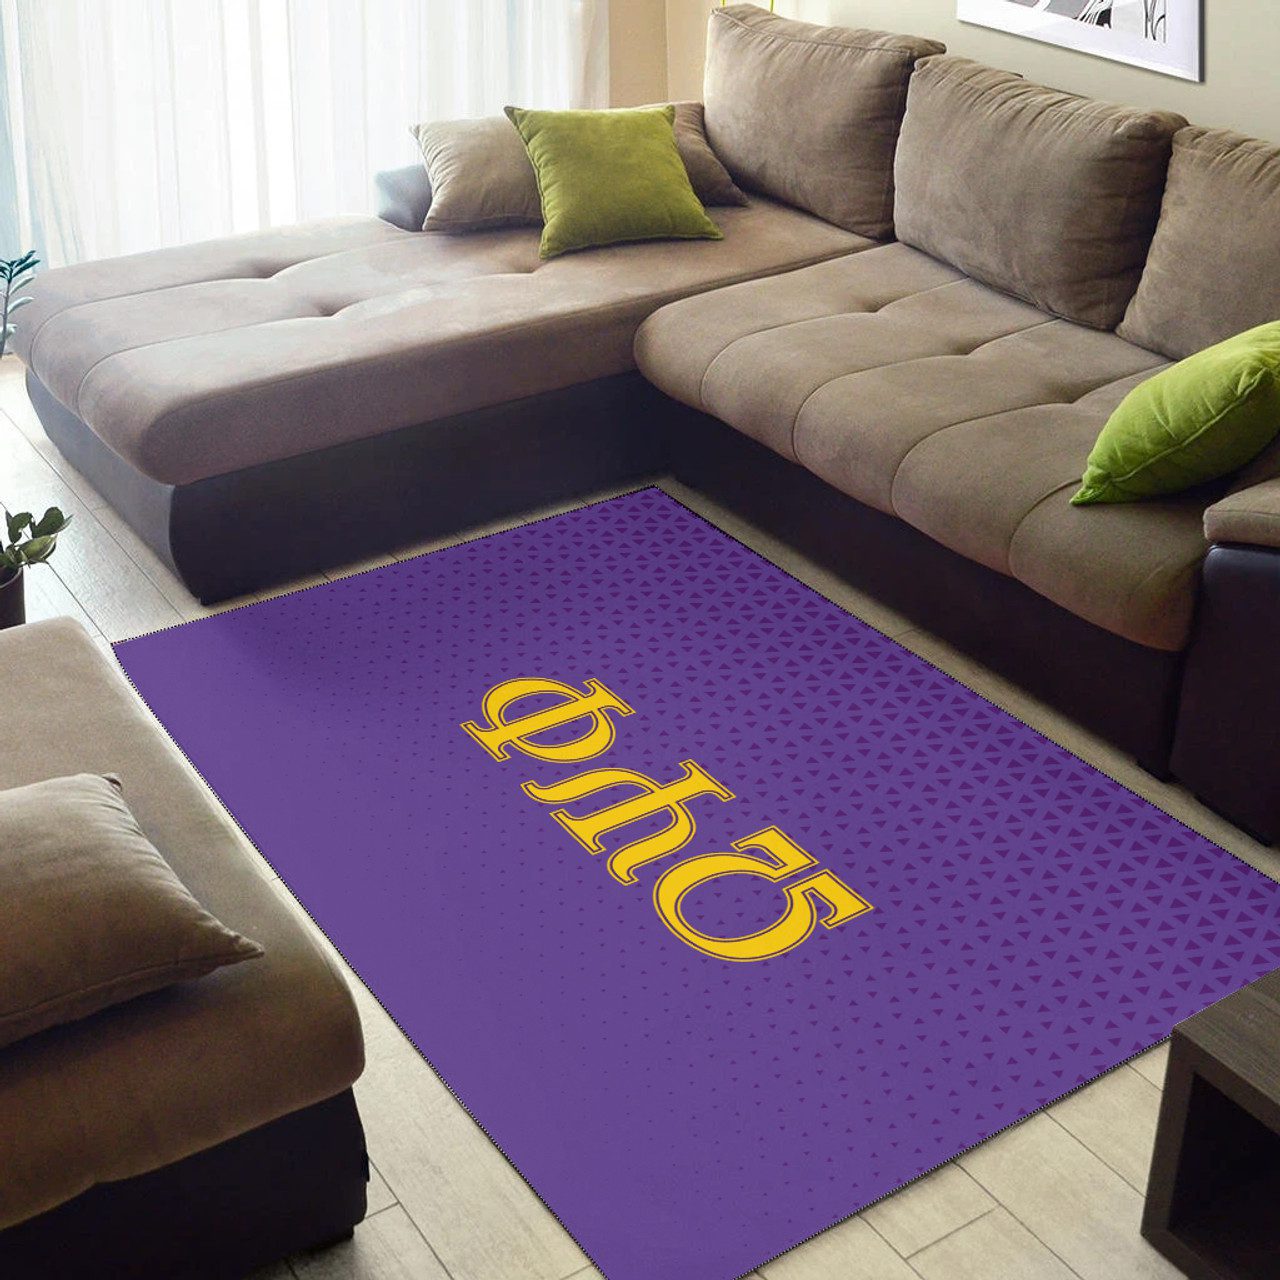 Omega Psi Phi Area Rug Classic Greek Letters Offical